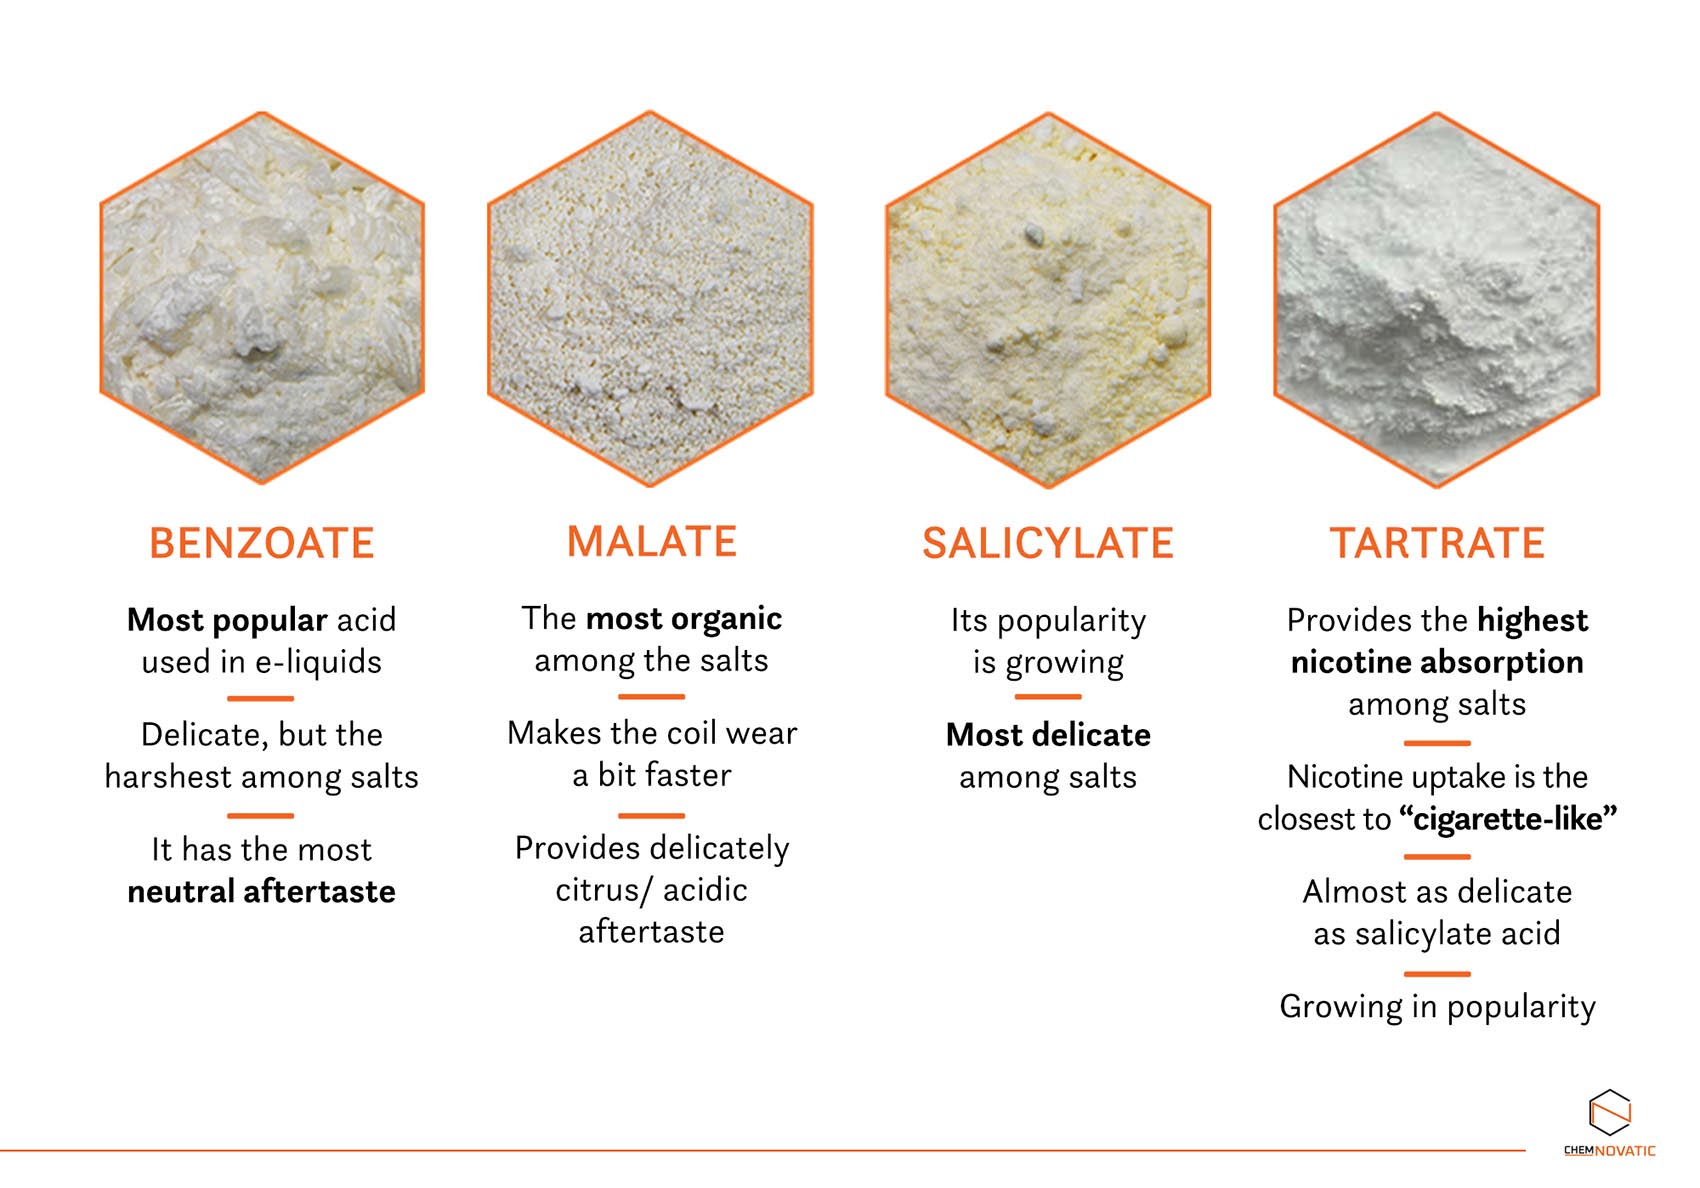 nicotine salts: benzoate, malate, salicylate, and tartrate, and their characteristics